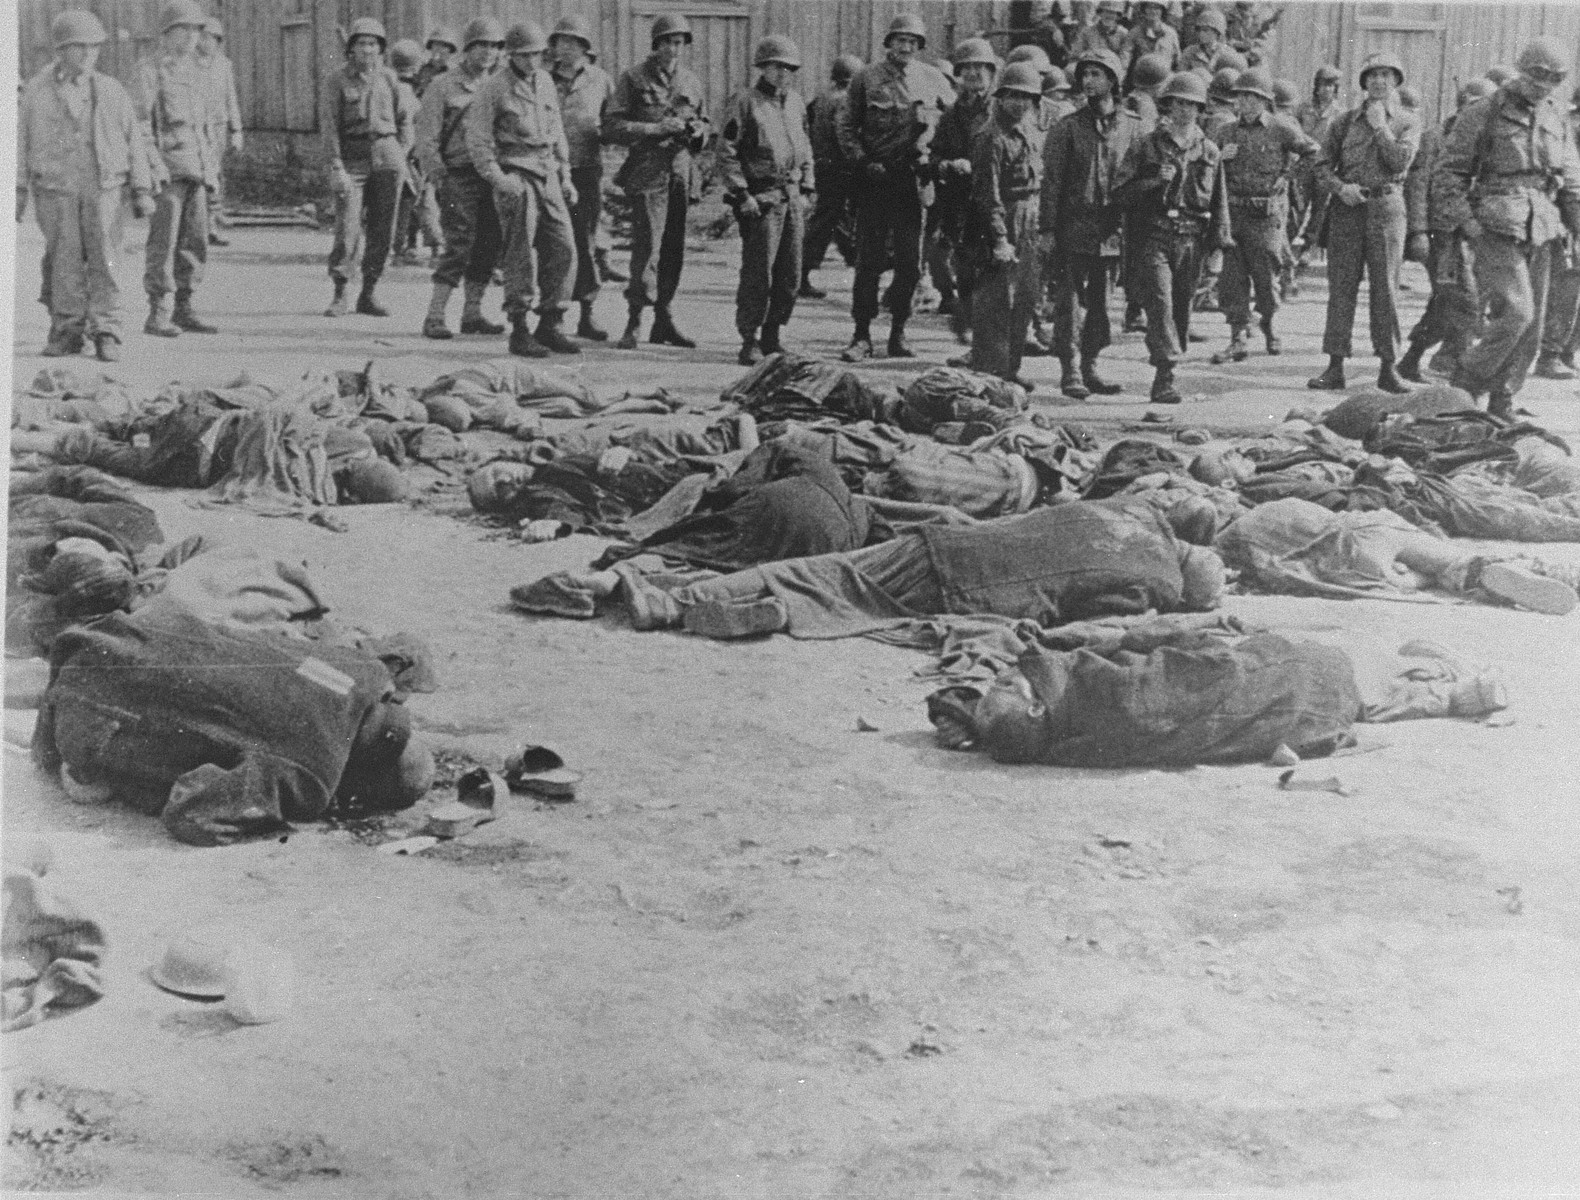 American soldiers view the bodies of prisoners that lie strewn on the ground in the newly liberated Ohrdruf concentration camp.